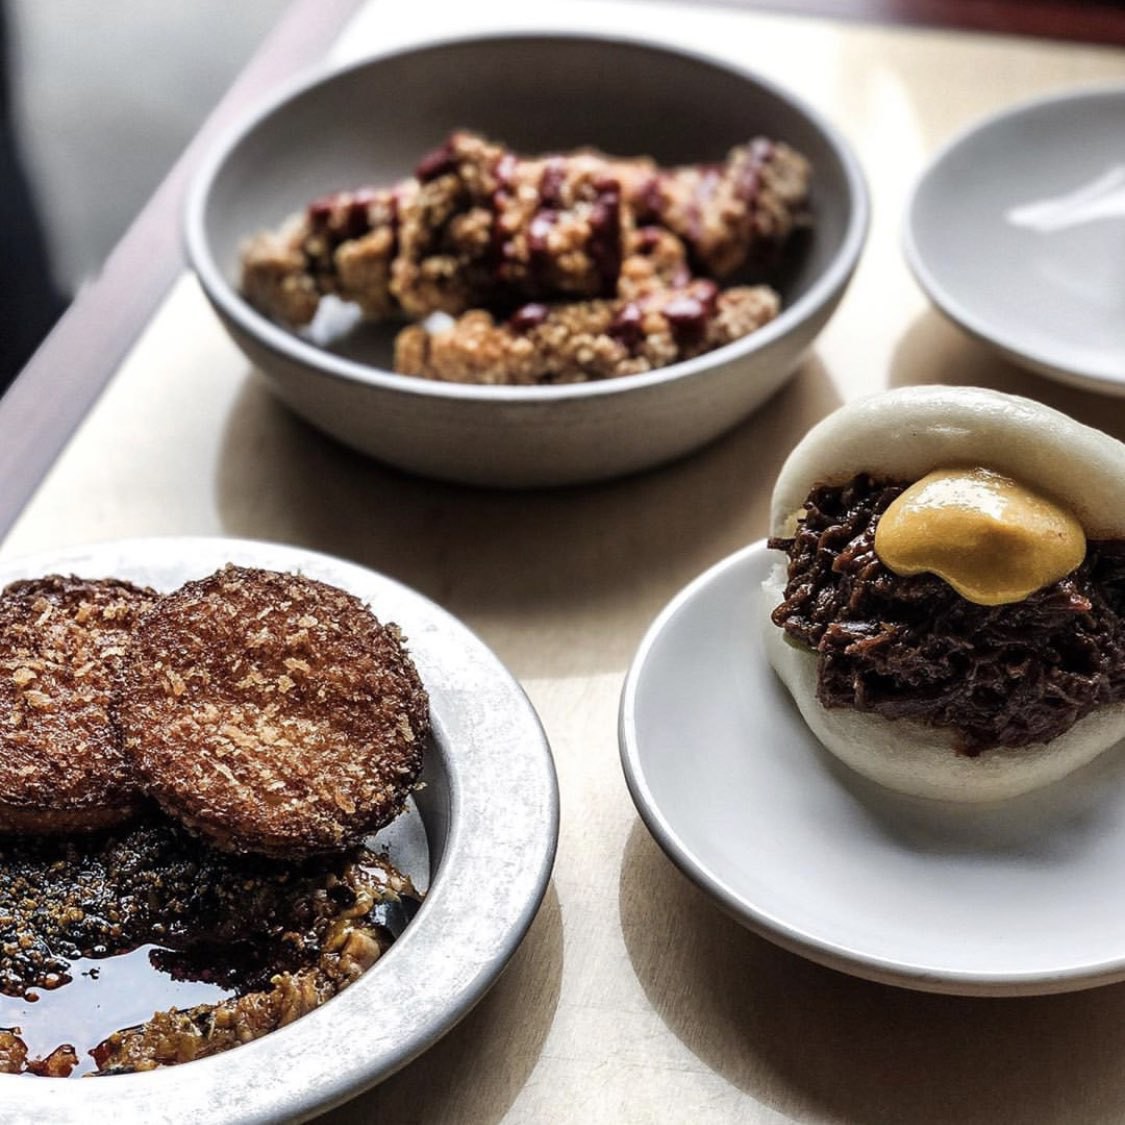 Dishes from bao such as aubergine dish and buns.